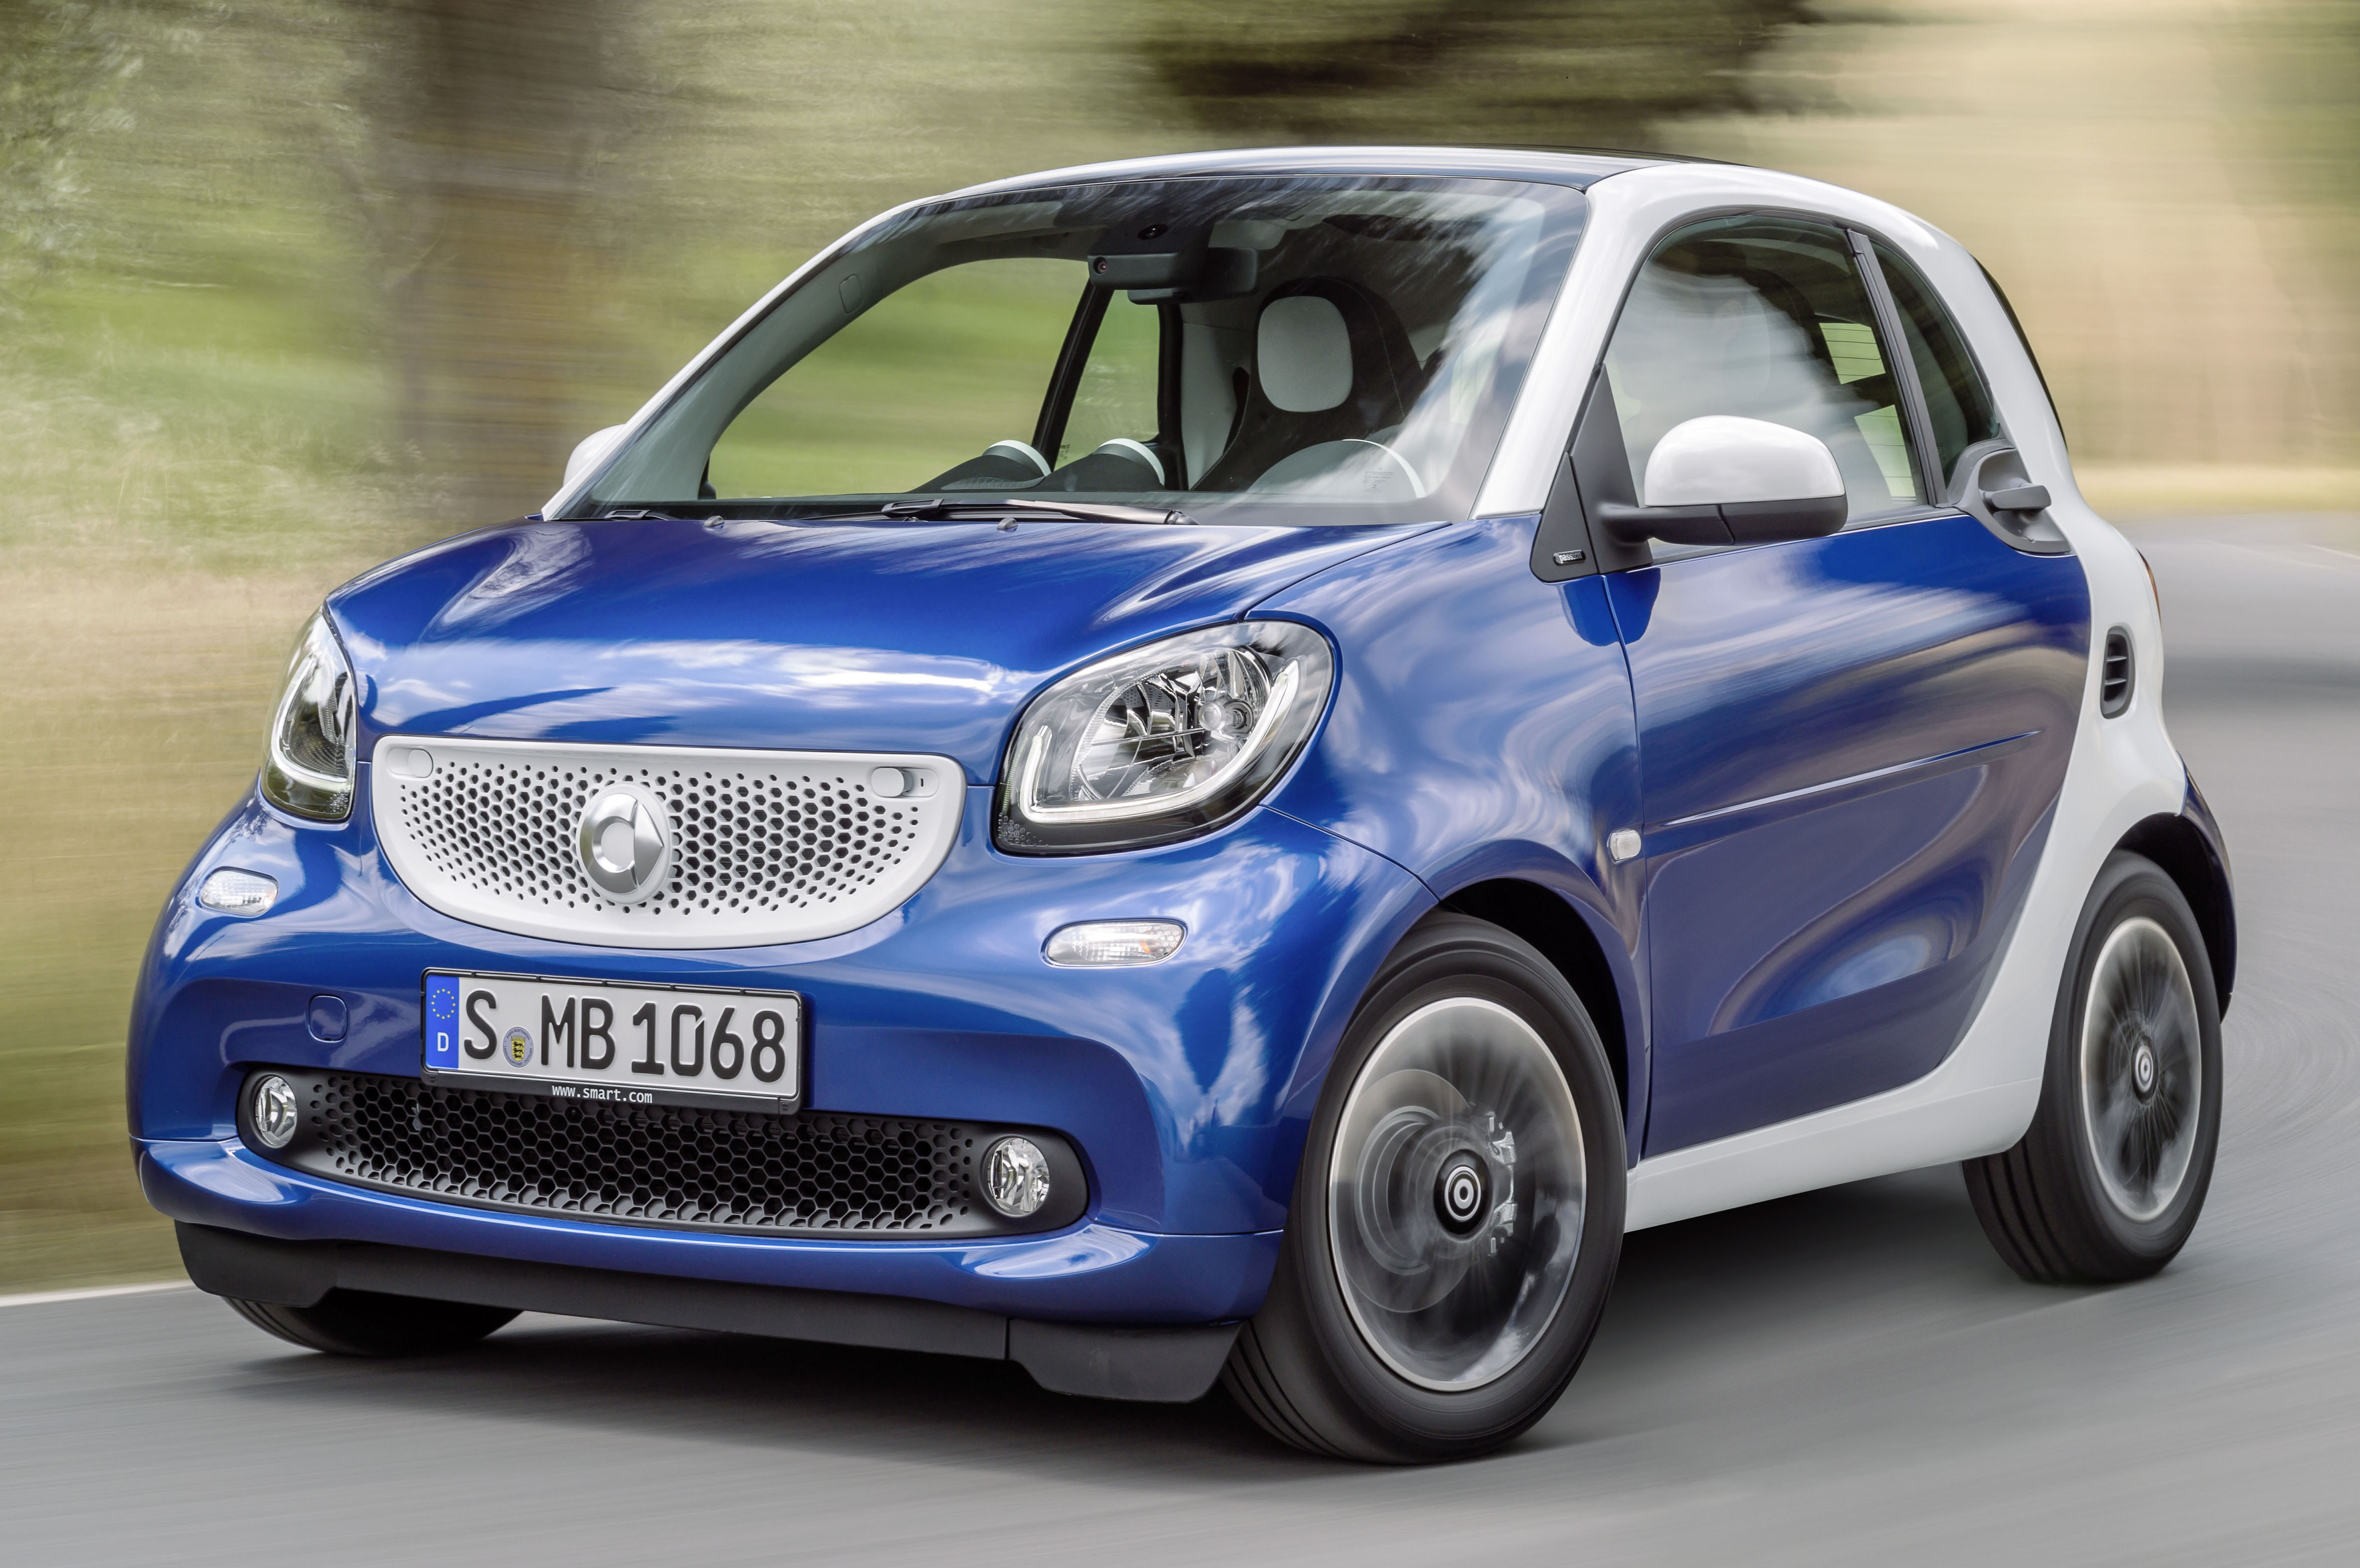 2015 smart fortwo and smart forfour city cars unveiled